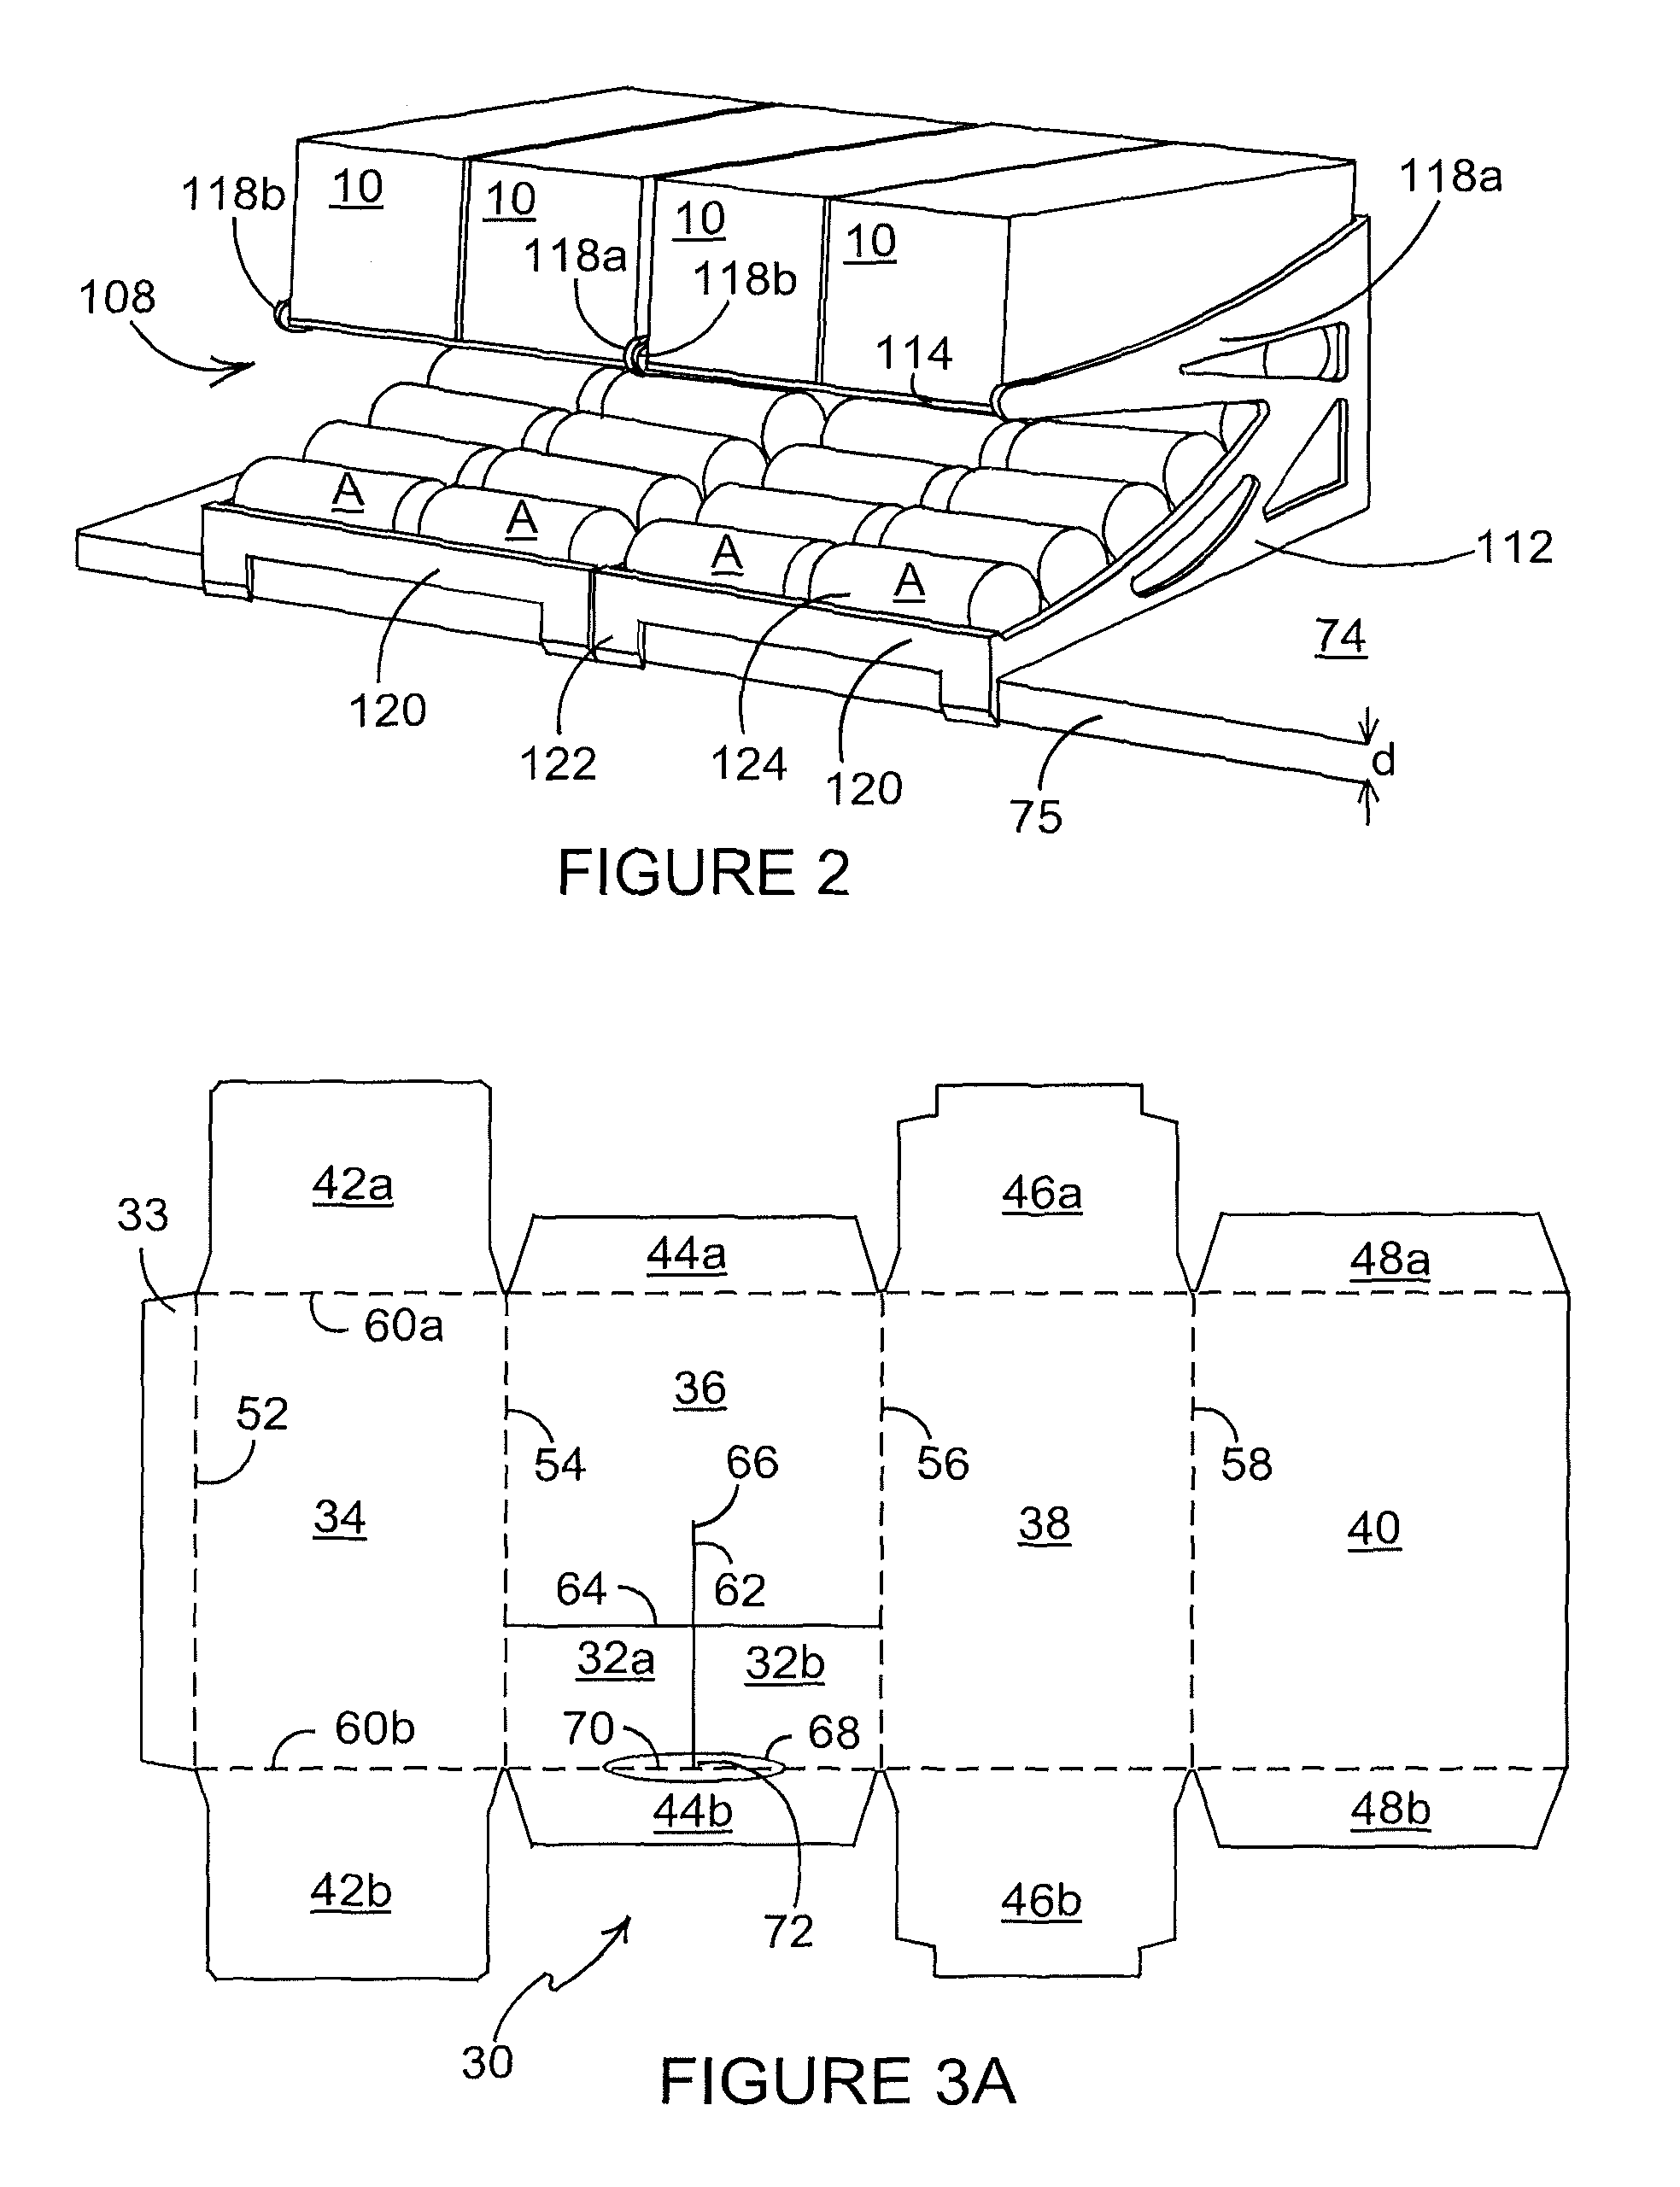 Display system, dispensing device and package for use therein